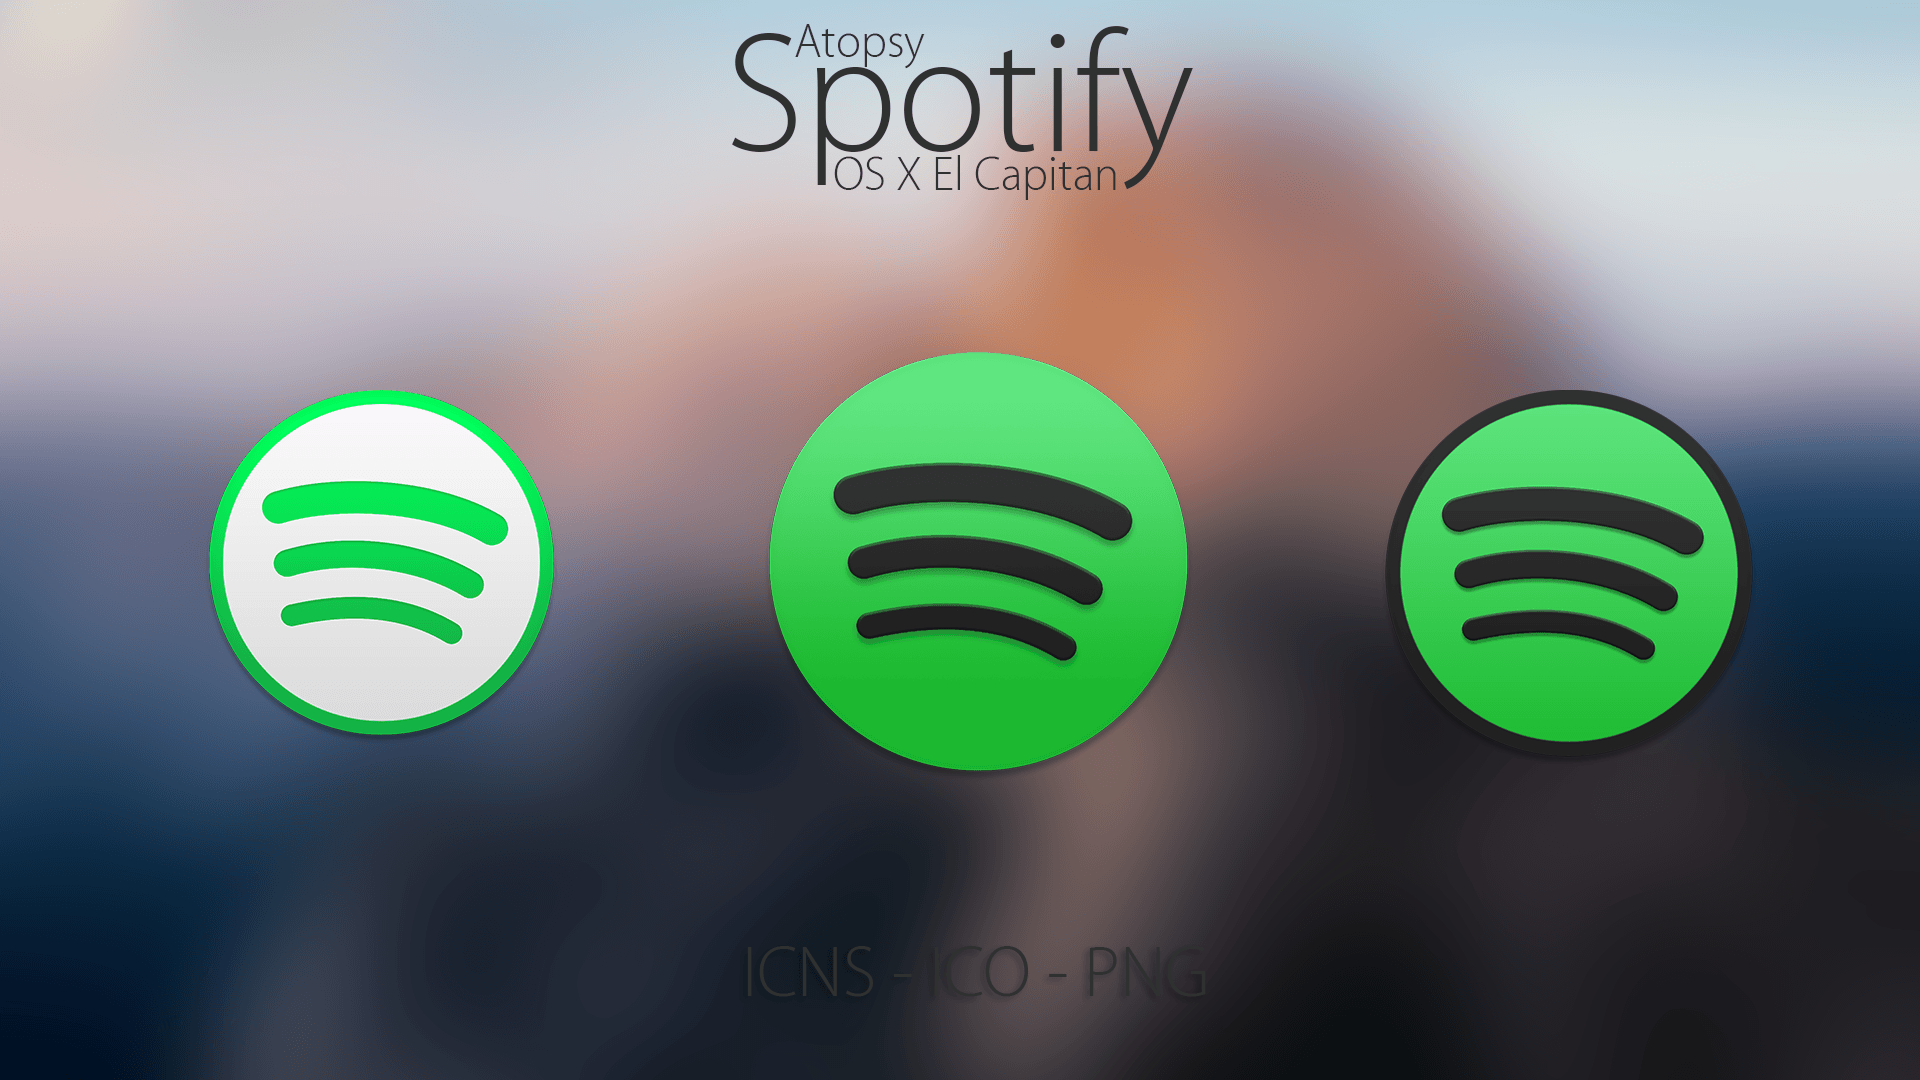 spotify desktop does music quality increase when you download